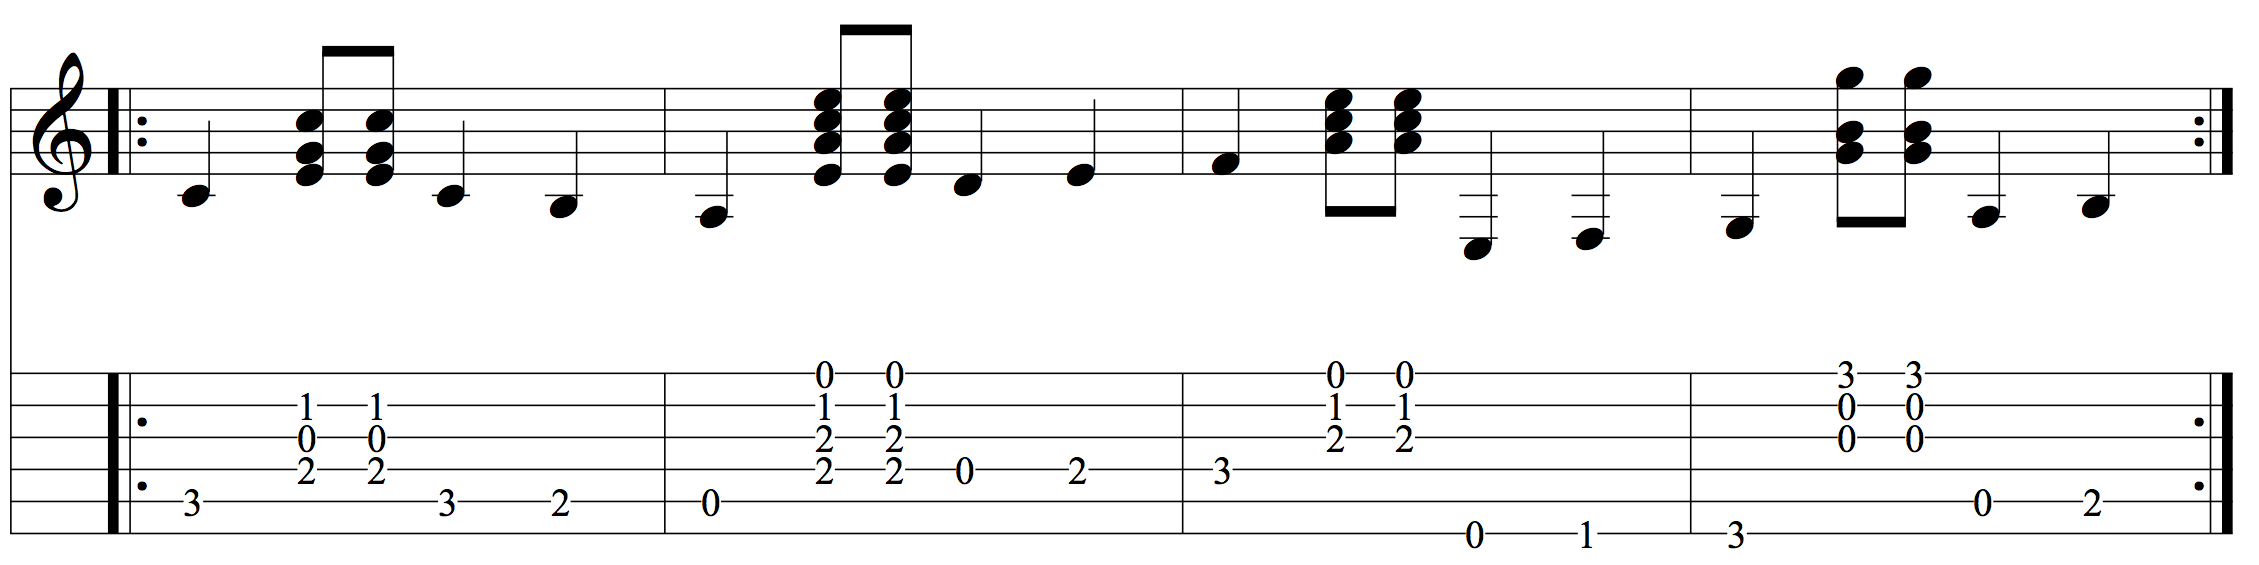 Building pick-hand accuracy with by adding melodic bass sequences to connect chords.